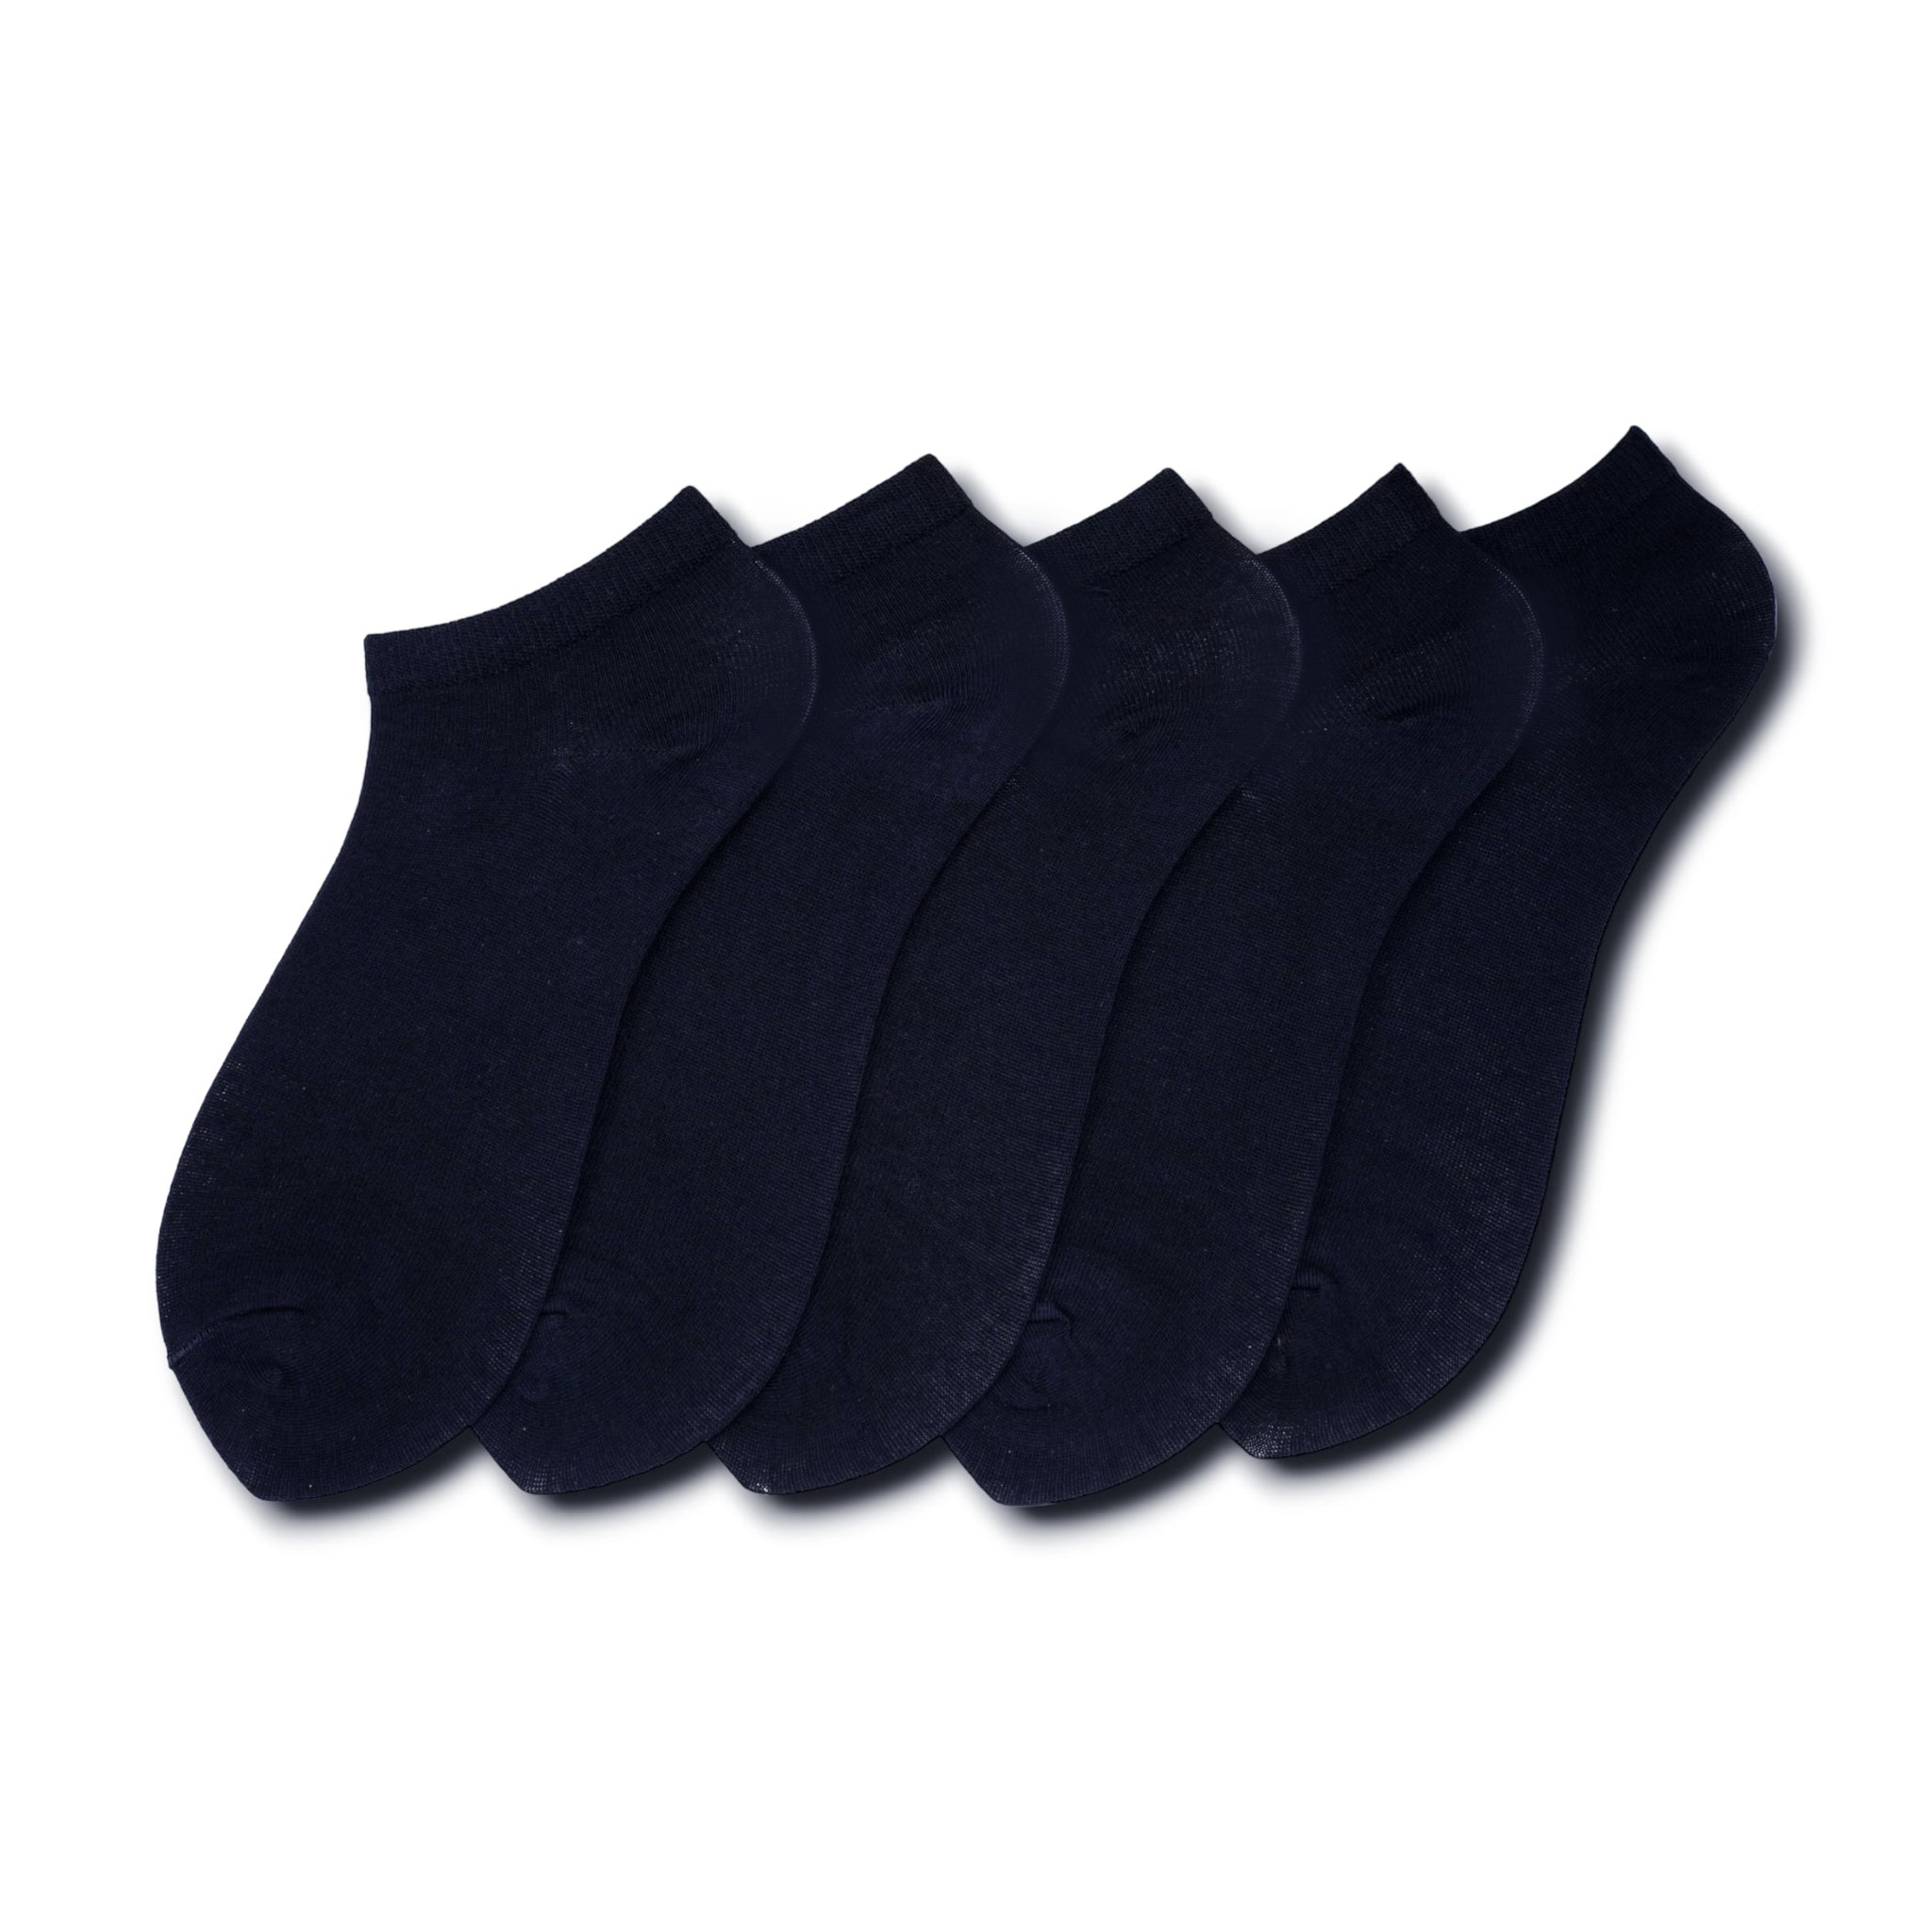 Young Wings Men's Navy Colour Cotton Fabric Solid Low Ankle Length Socks - Pack of 5, Style no. 1100-M1